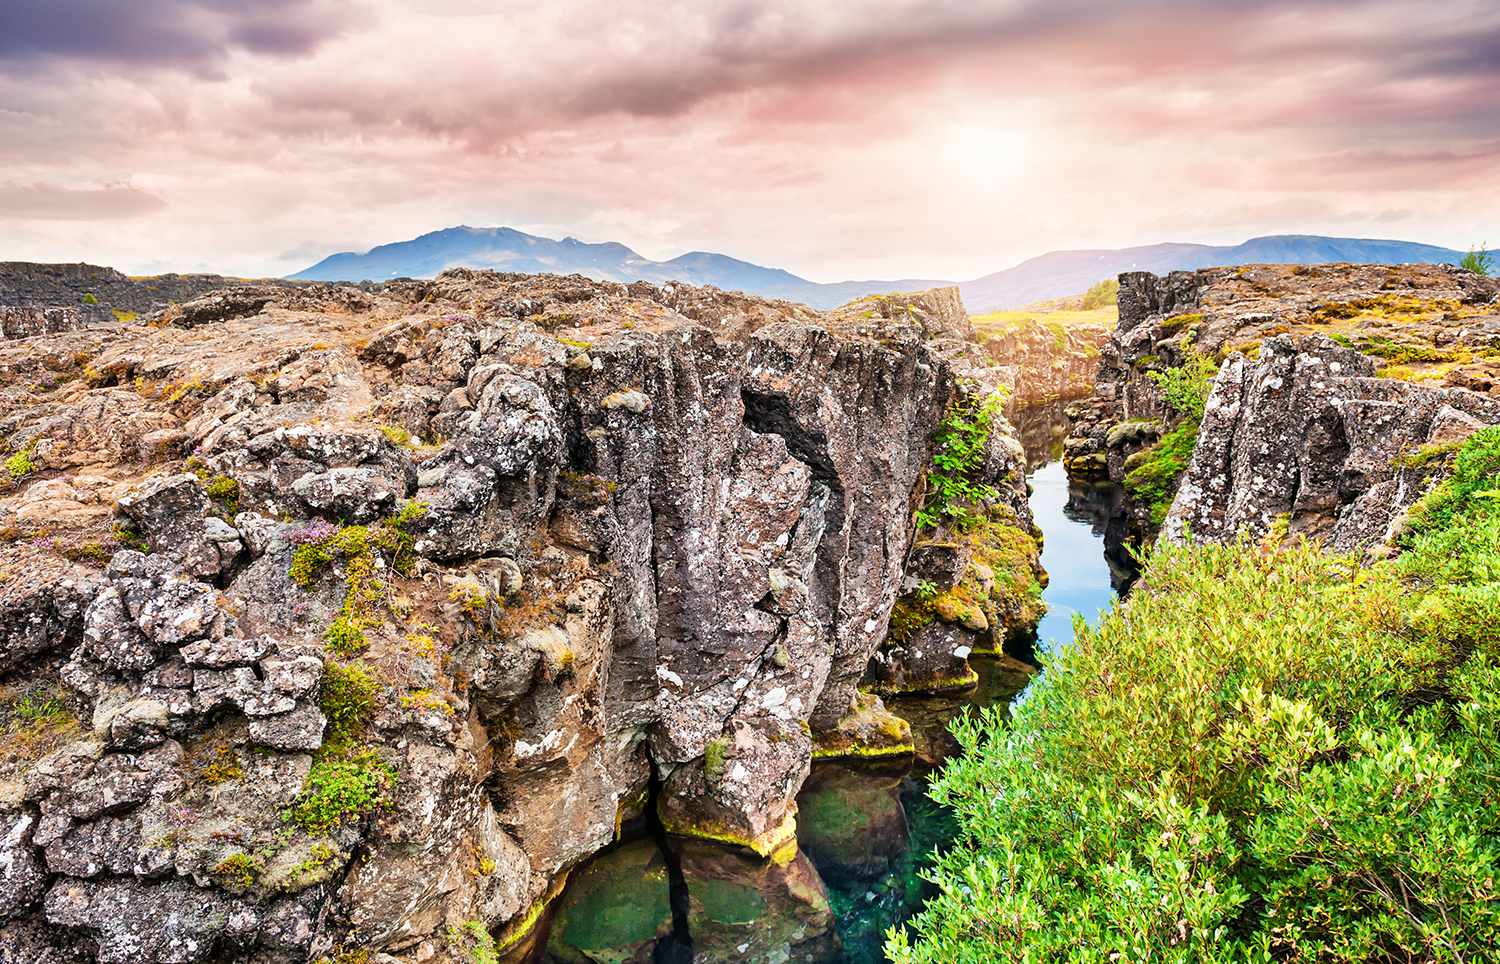 The green and rocky landscape at Thingvellir National Park